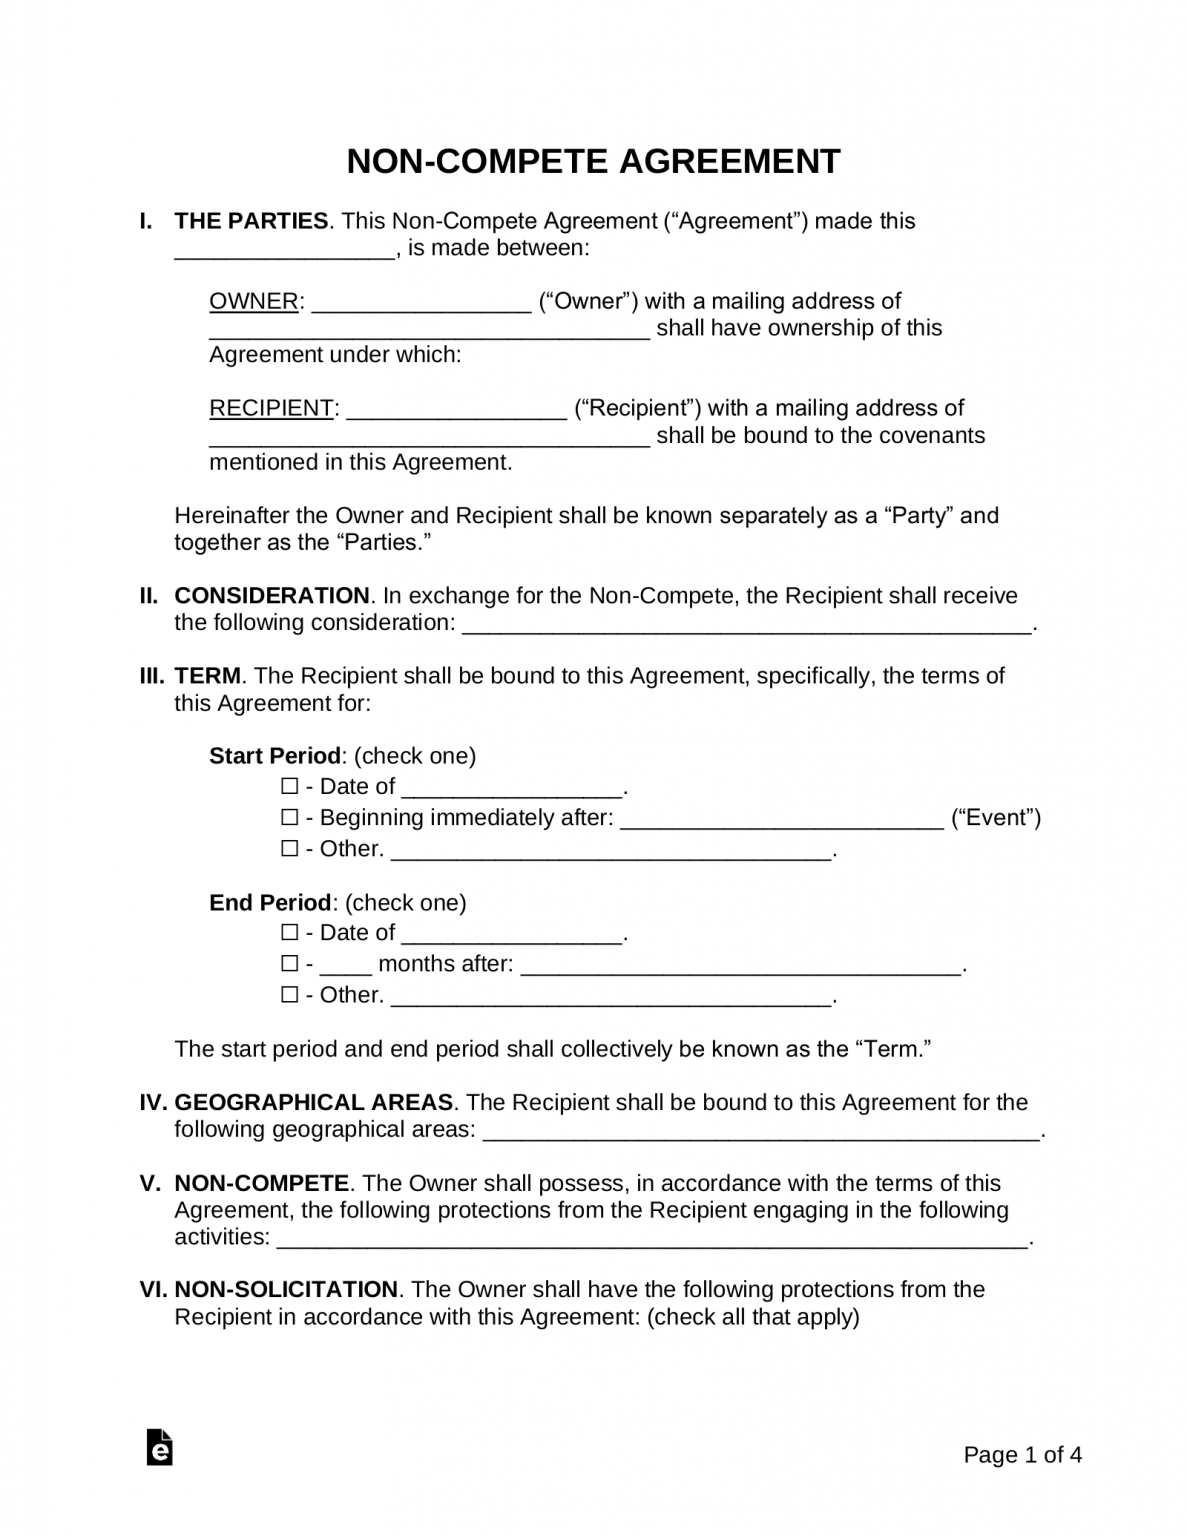 free-non-compete-agreement-template-pdf-word-eforms